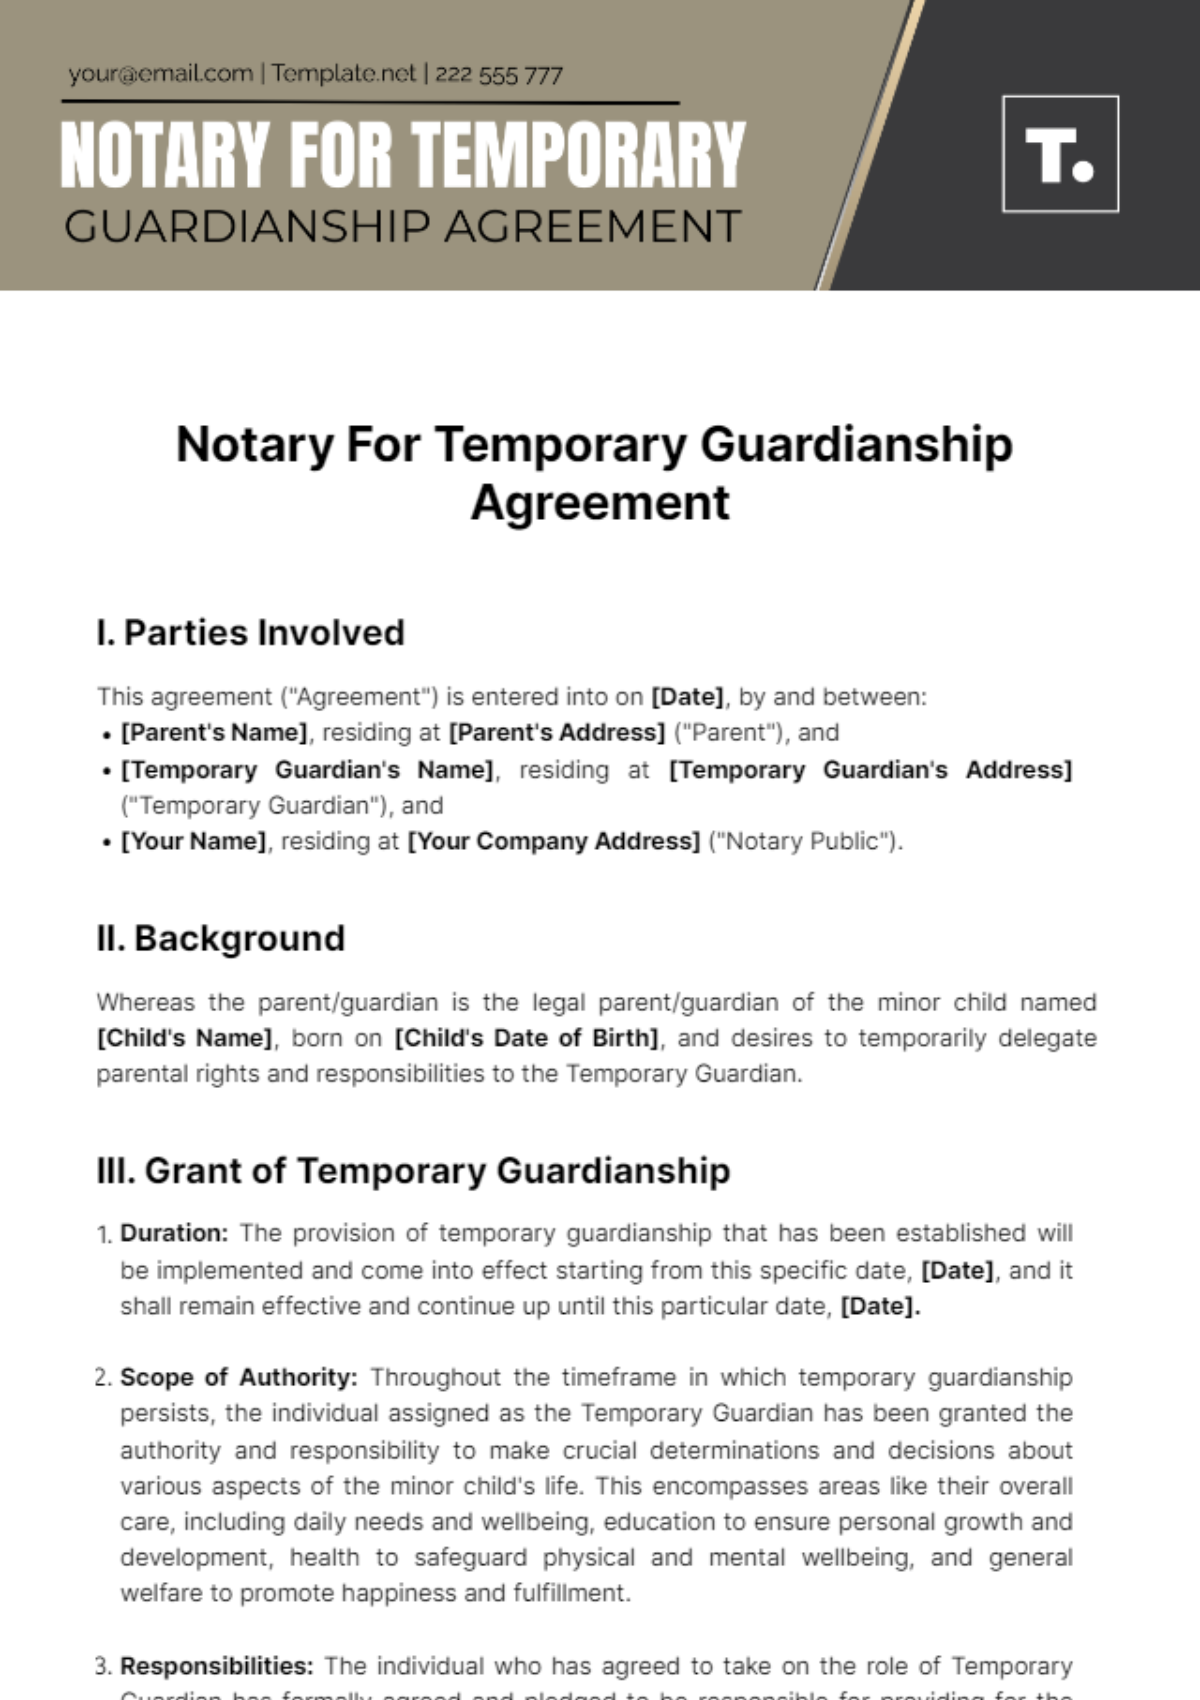 Notary For Temporary Guardianship Agreement Template